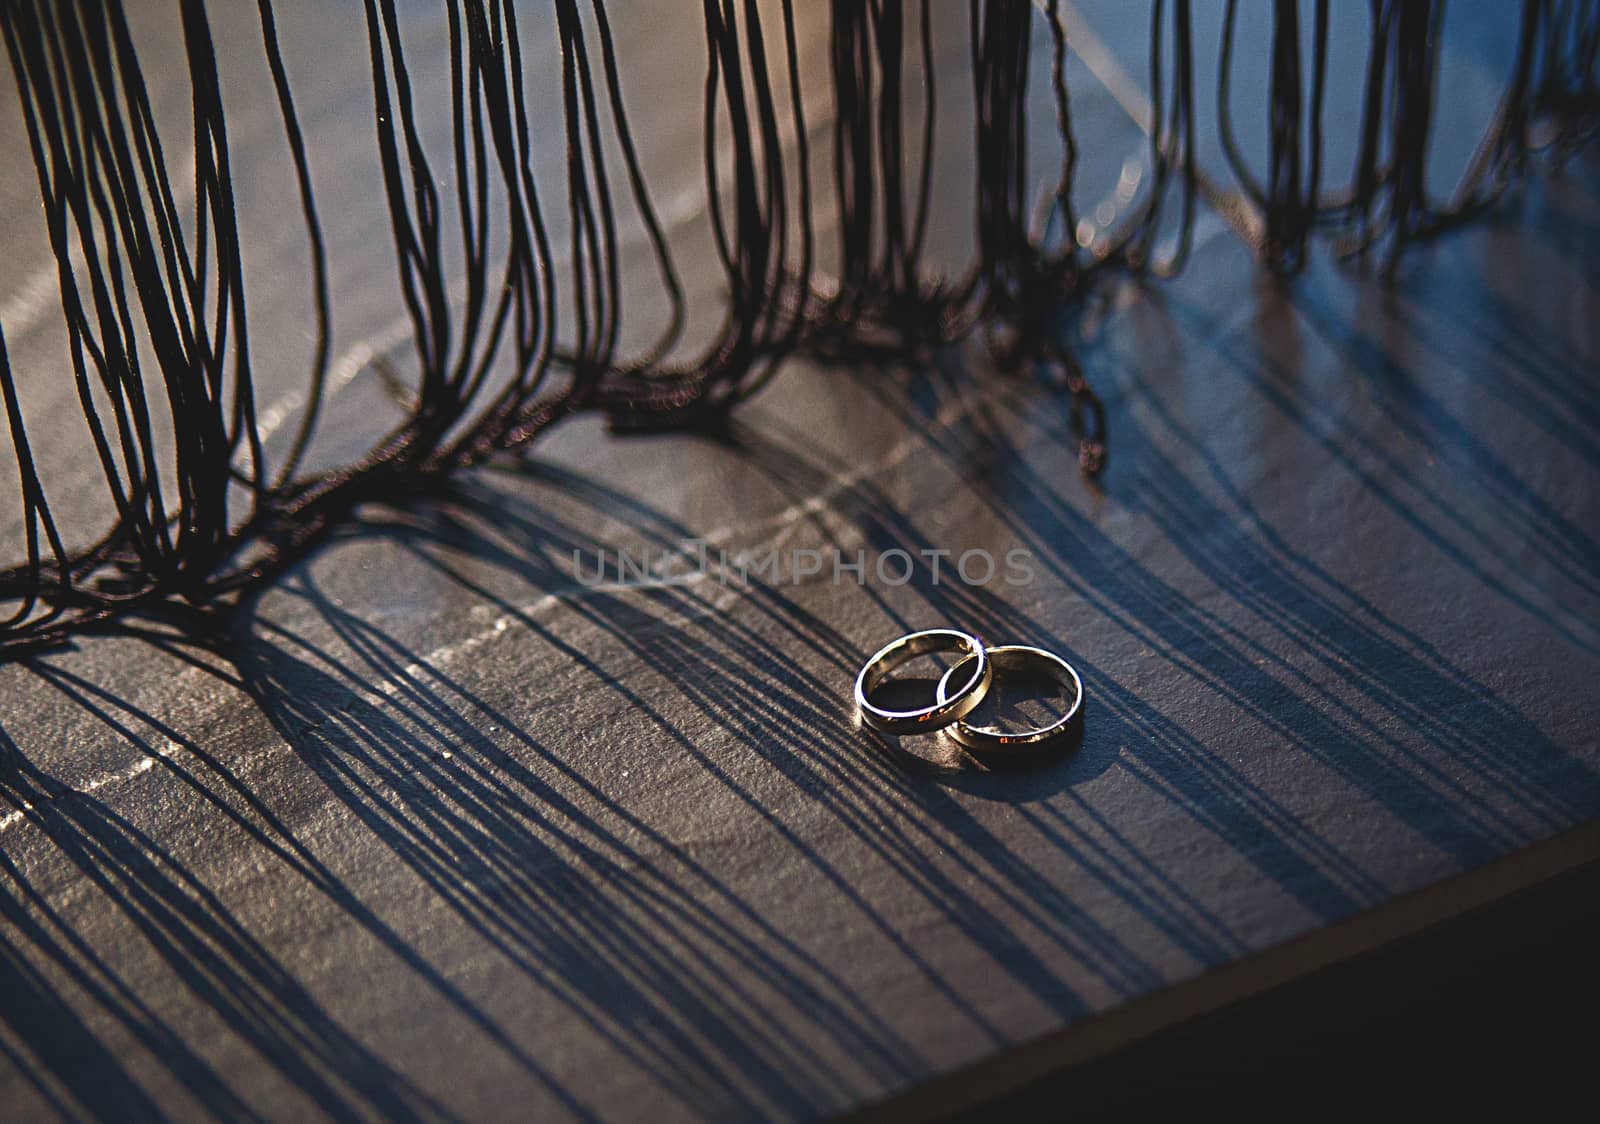 Wedding rings on a wooden board, with long shadows from tulle.